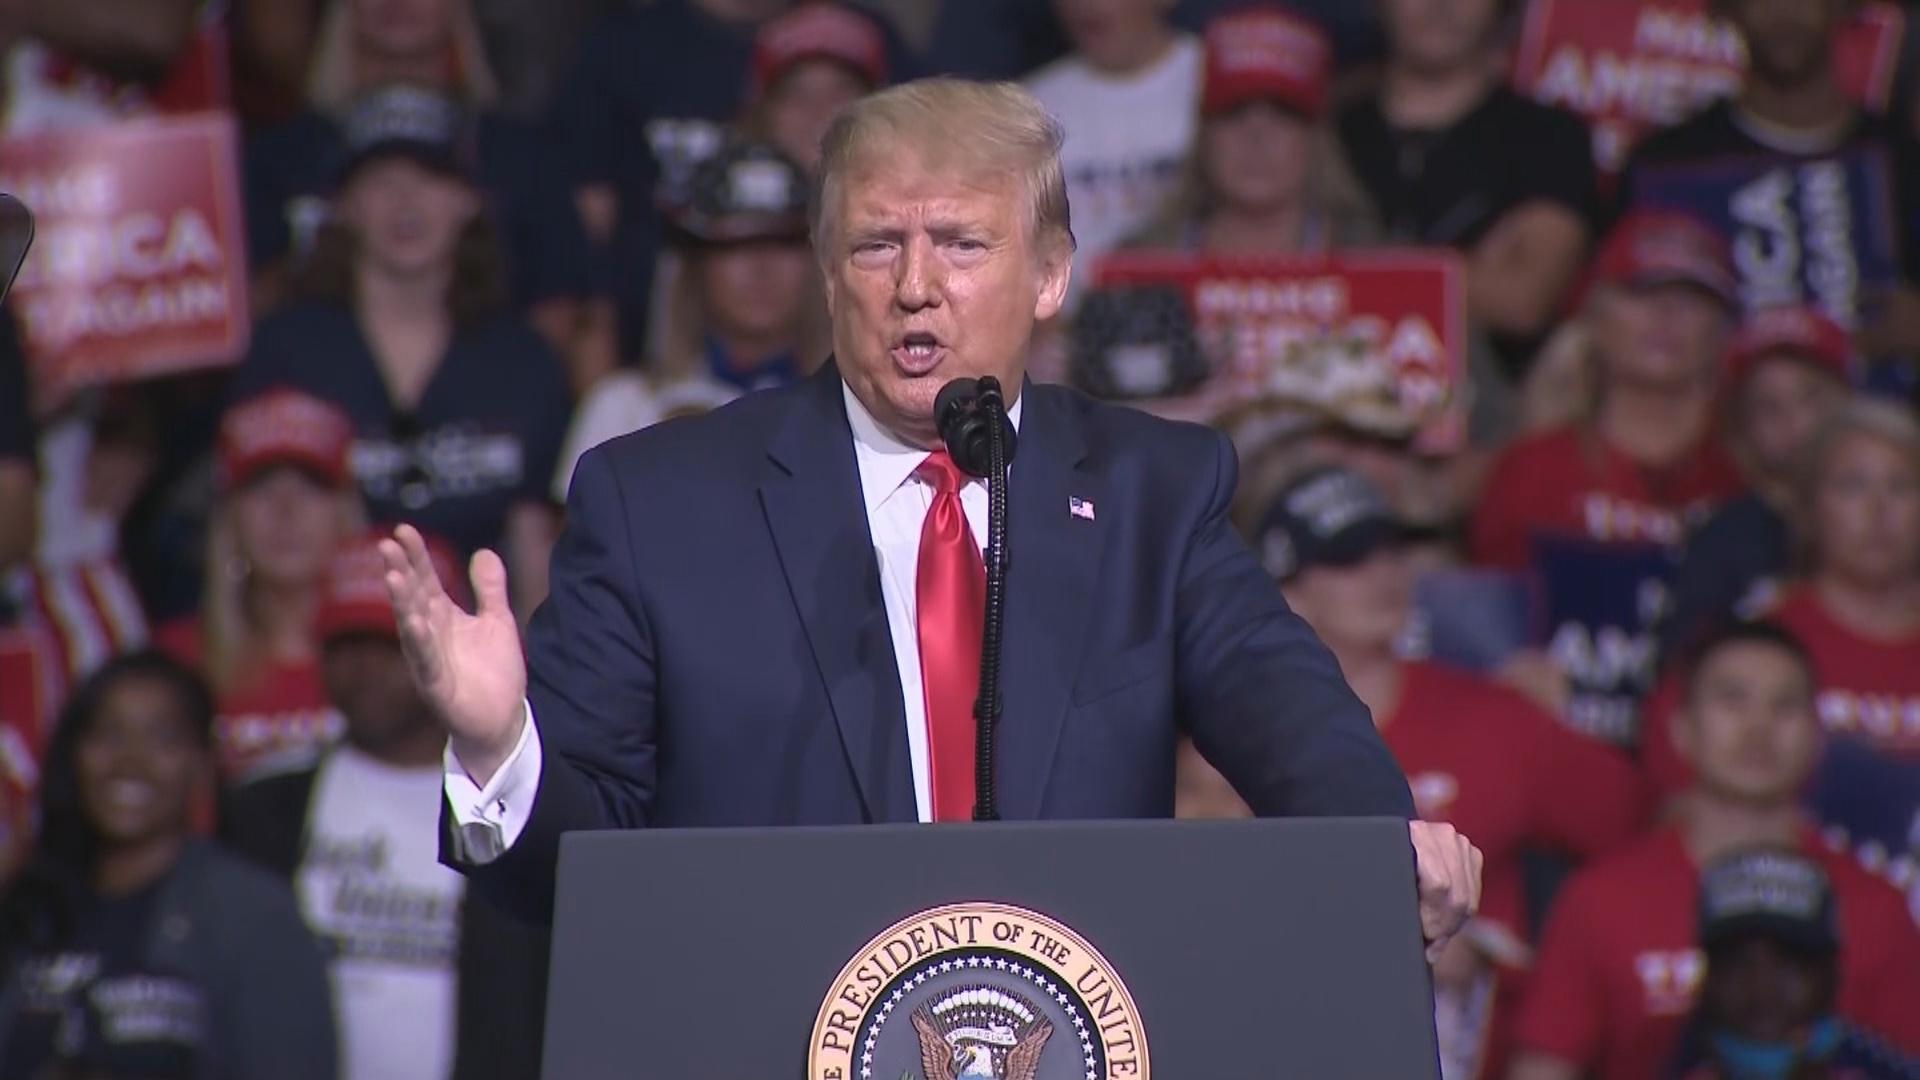 “I have done a phenomenal job with it,” President Donald Trump says of his response to COVID-19 at a campaign rally in Tulsa, Oklahoma, on Saturday, June 20, 2020. (WTTW News via CNN)